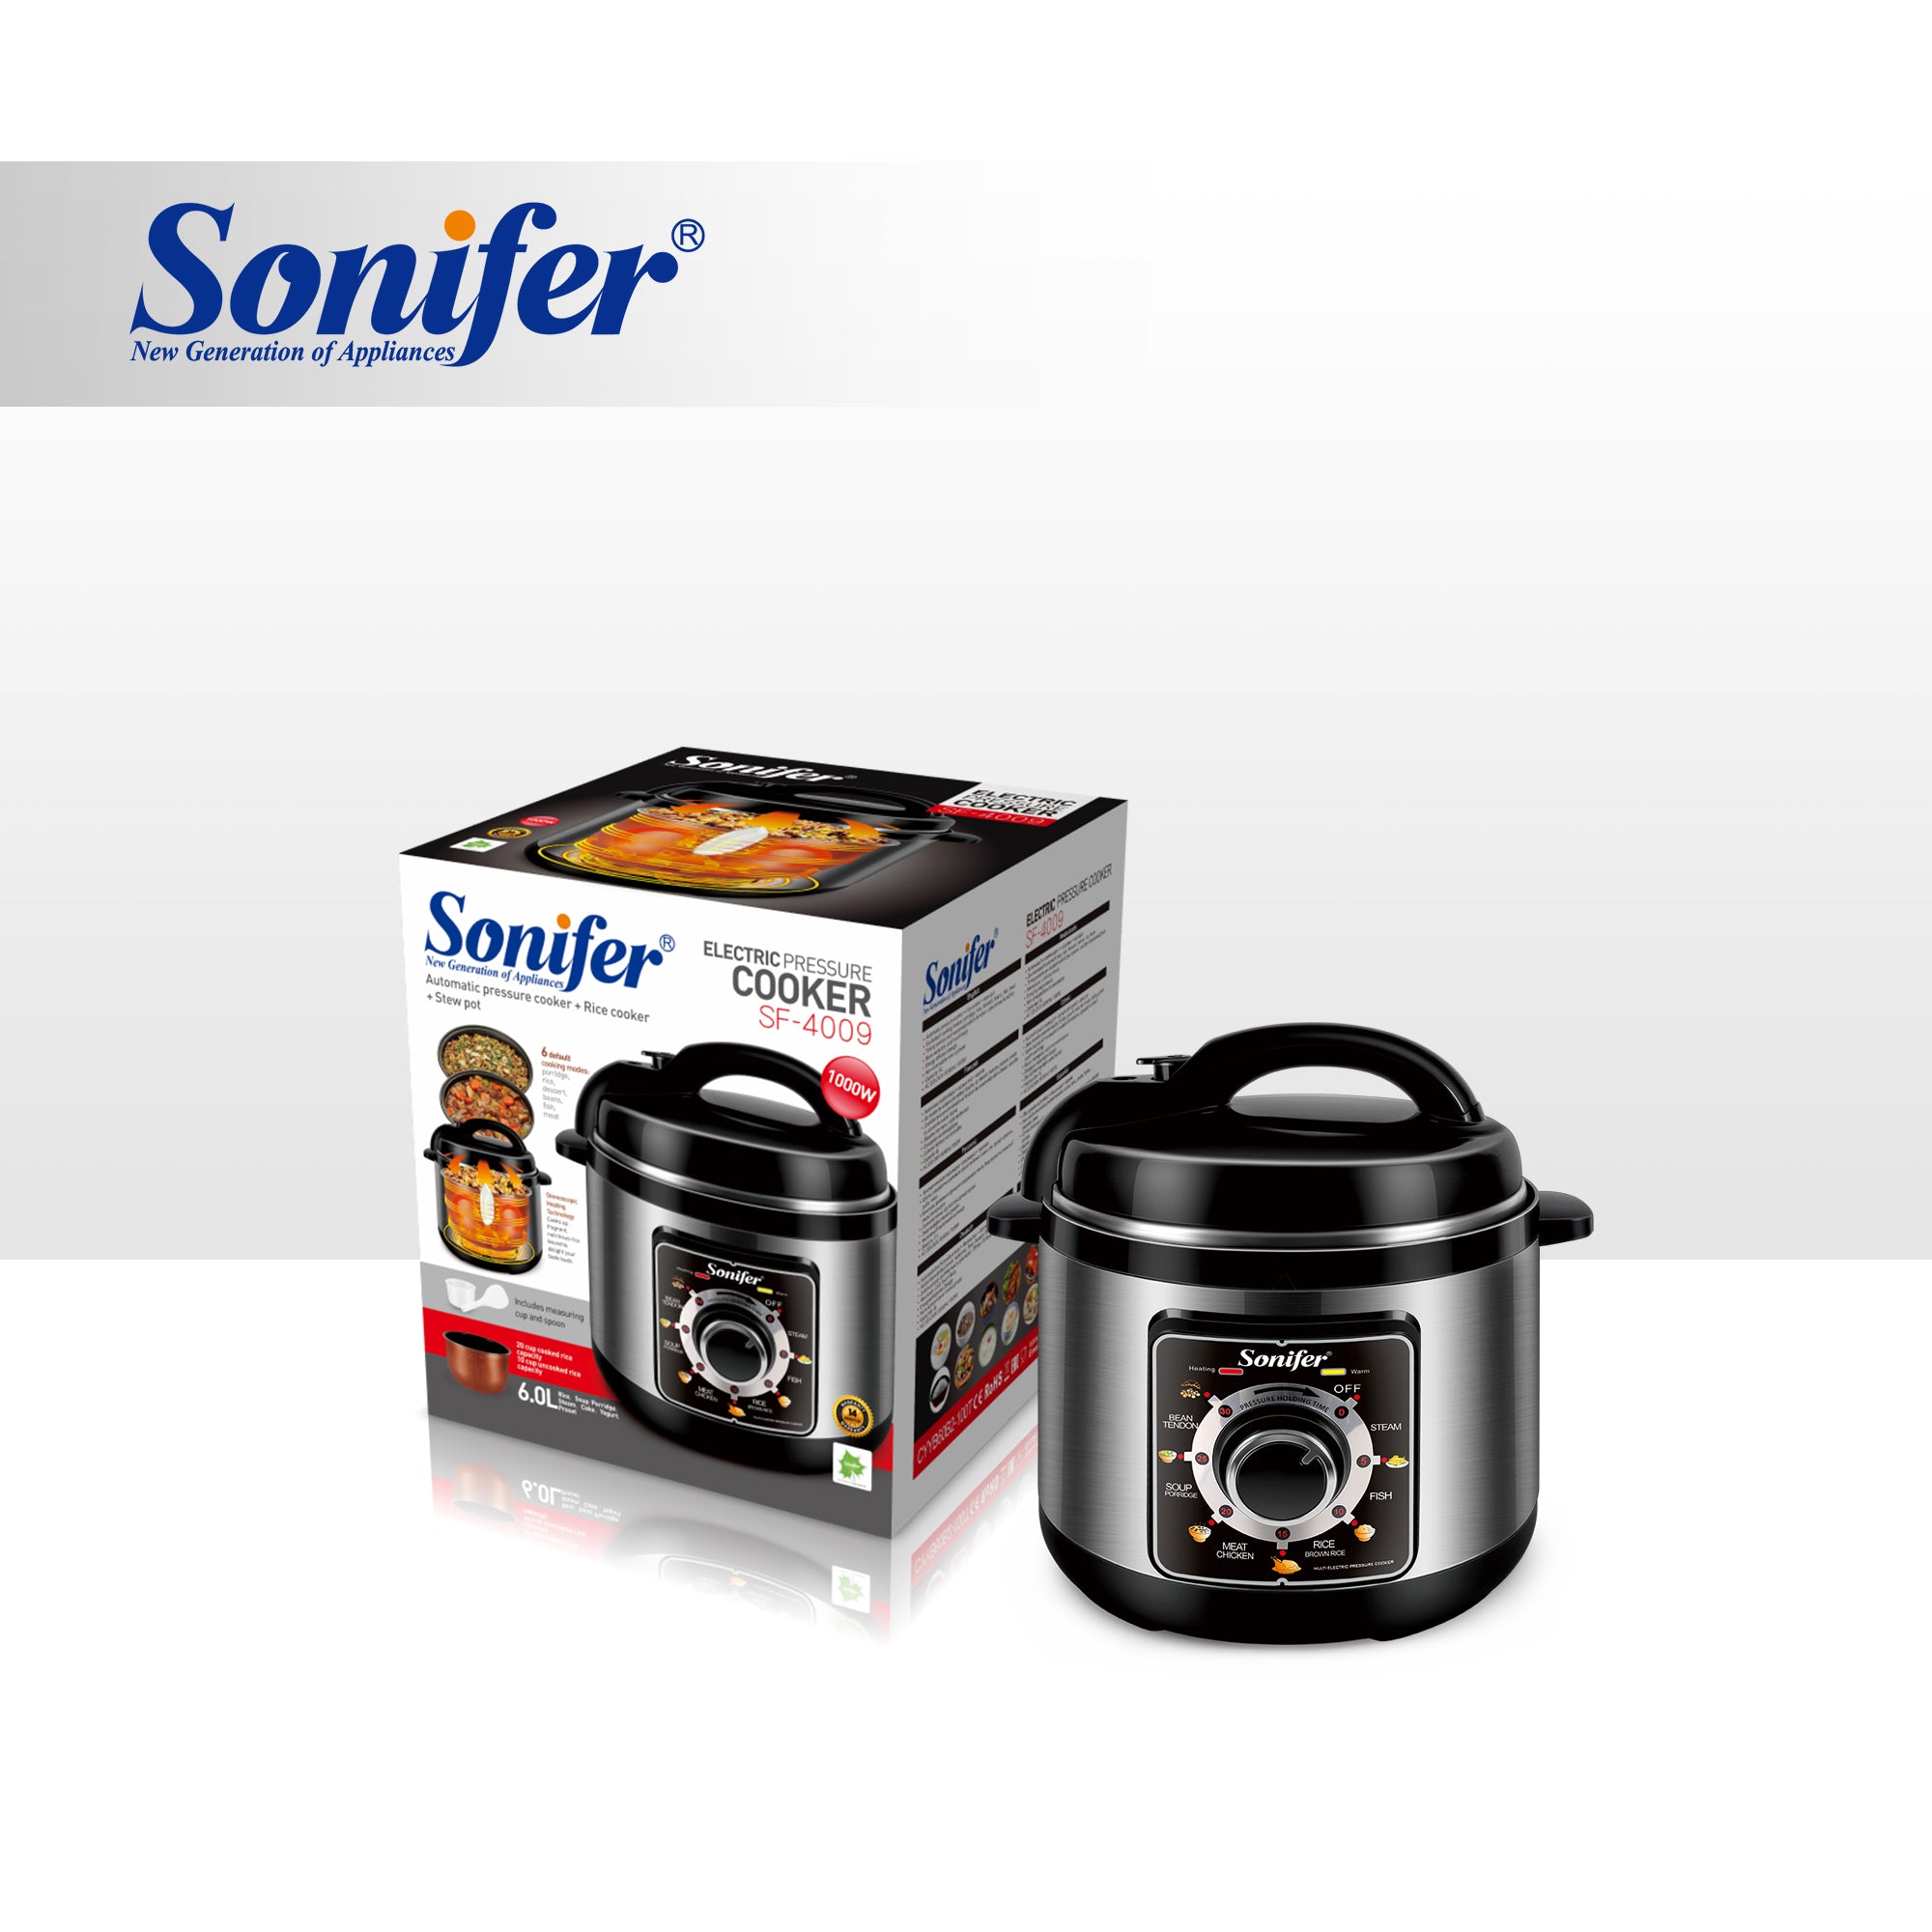 Sonifer All-In-1 Electric Pressure Cooker 6L Capacity Meat Timing Control and Heat Preservation SF-4009